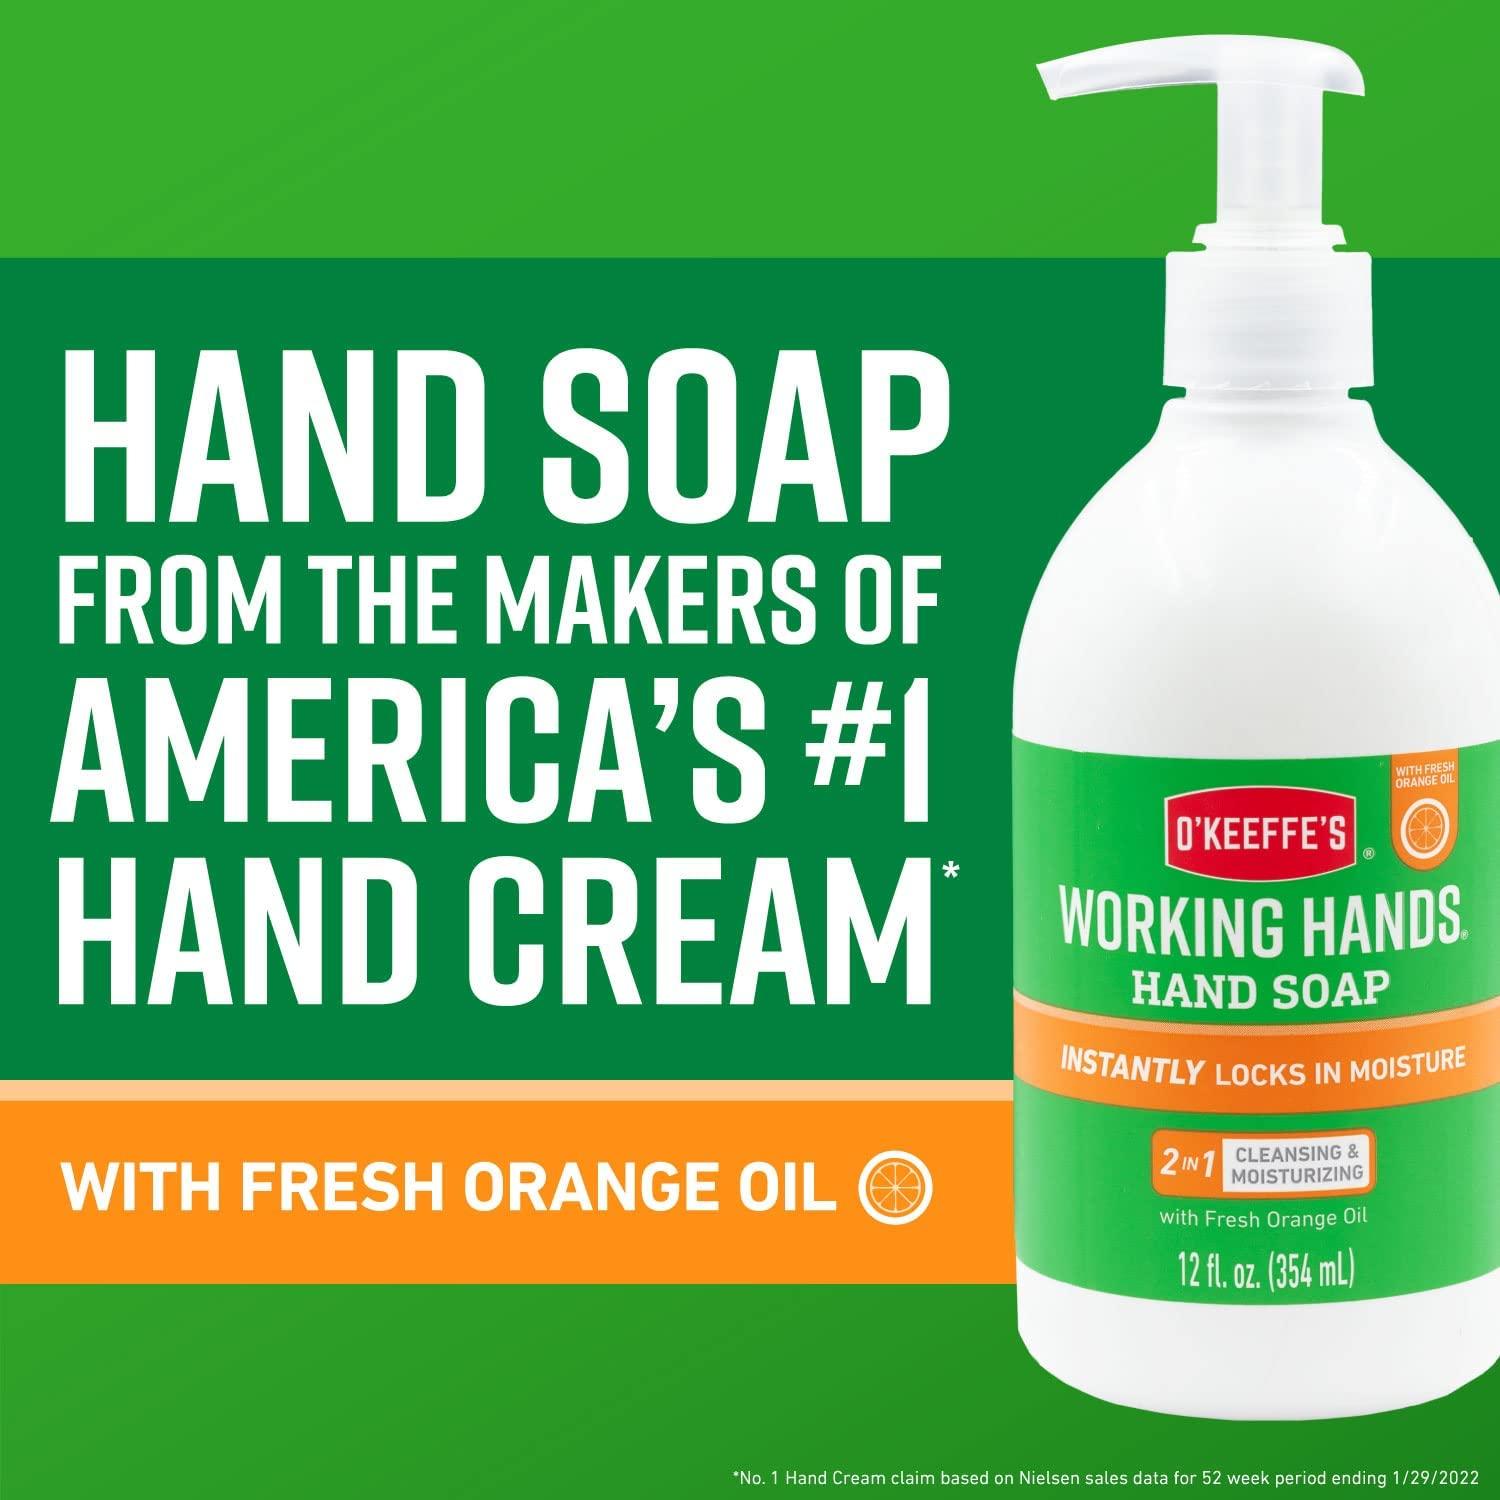 O'Keeffe's Working Hands Moisturizing Hand Soap with Fresh Orange Oil, 12  oz Pump (Pack of 2)   price tracker / tracking,  price history  charts,  price watches,  price drop